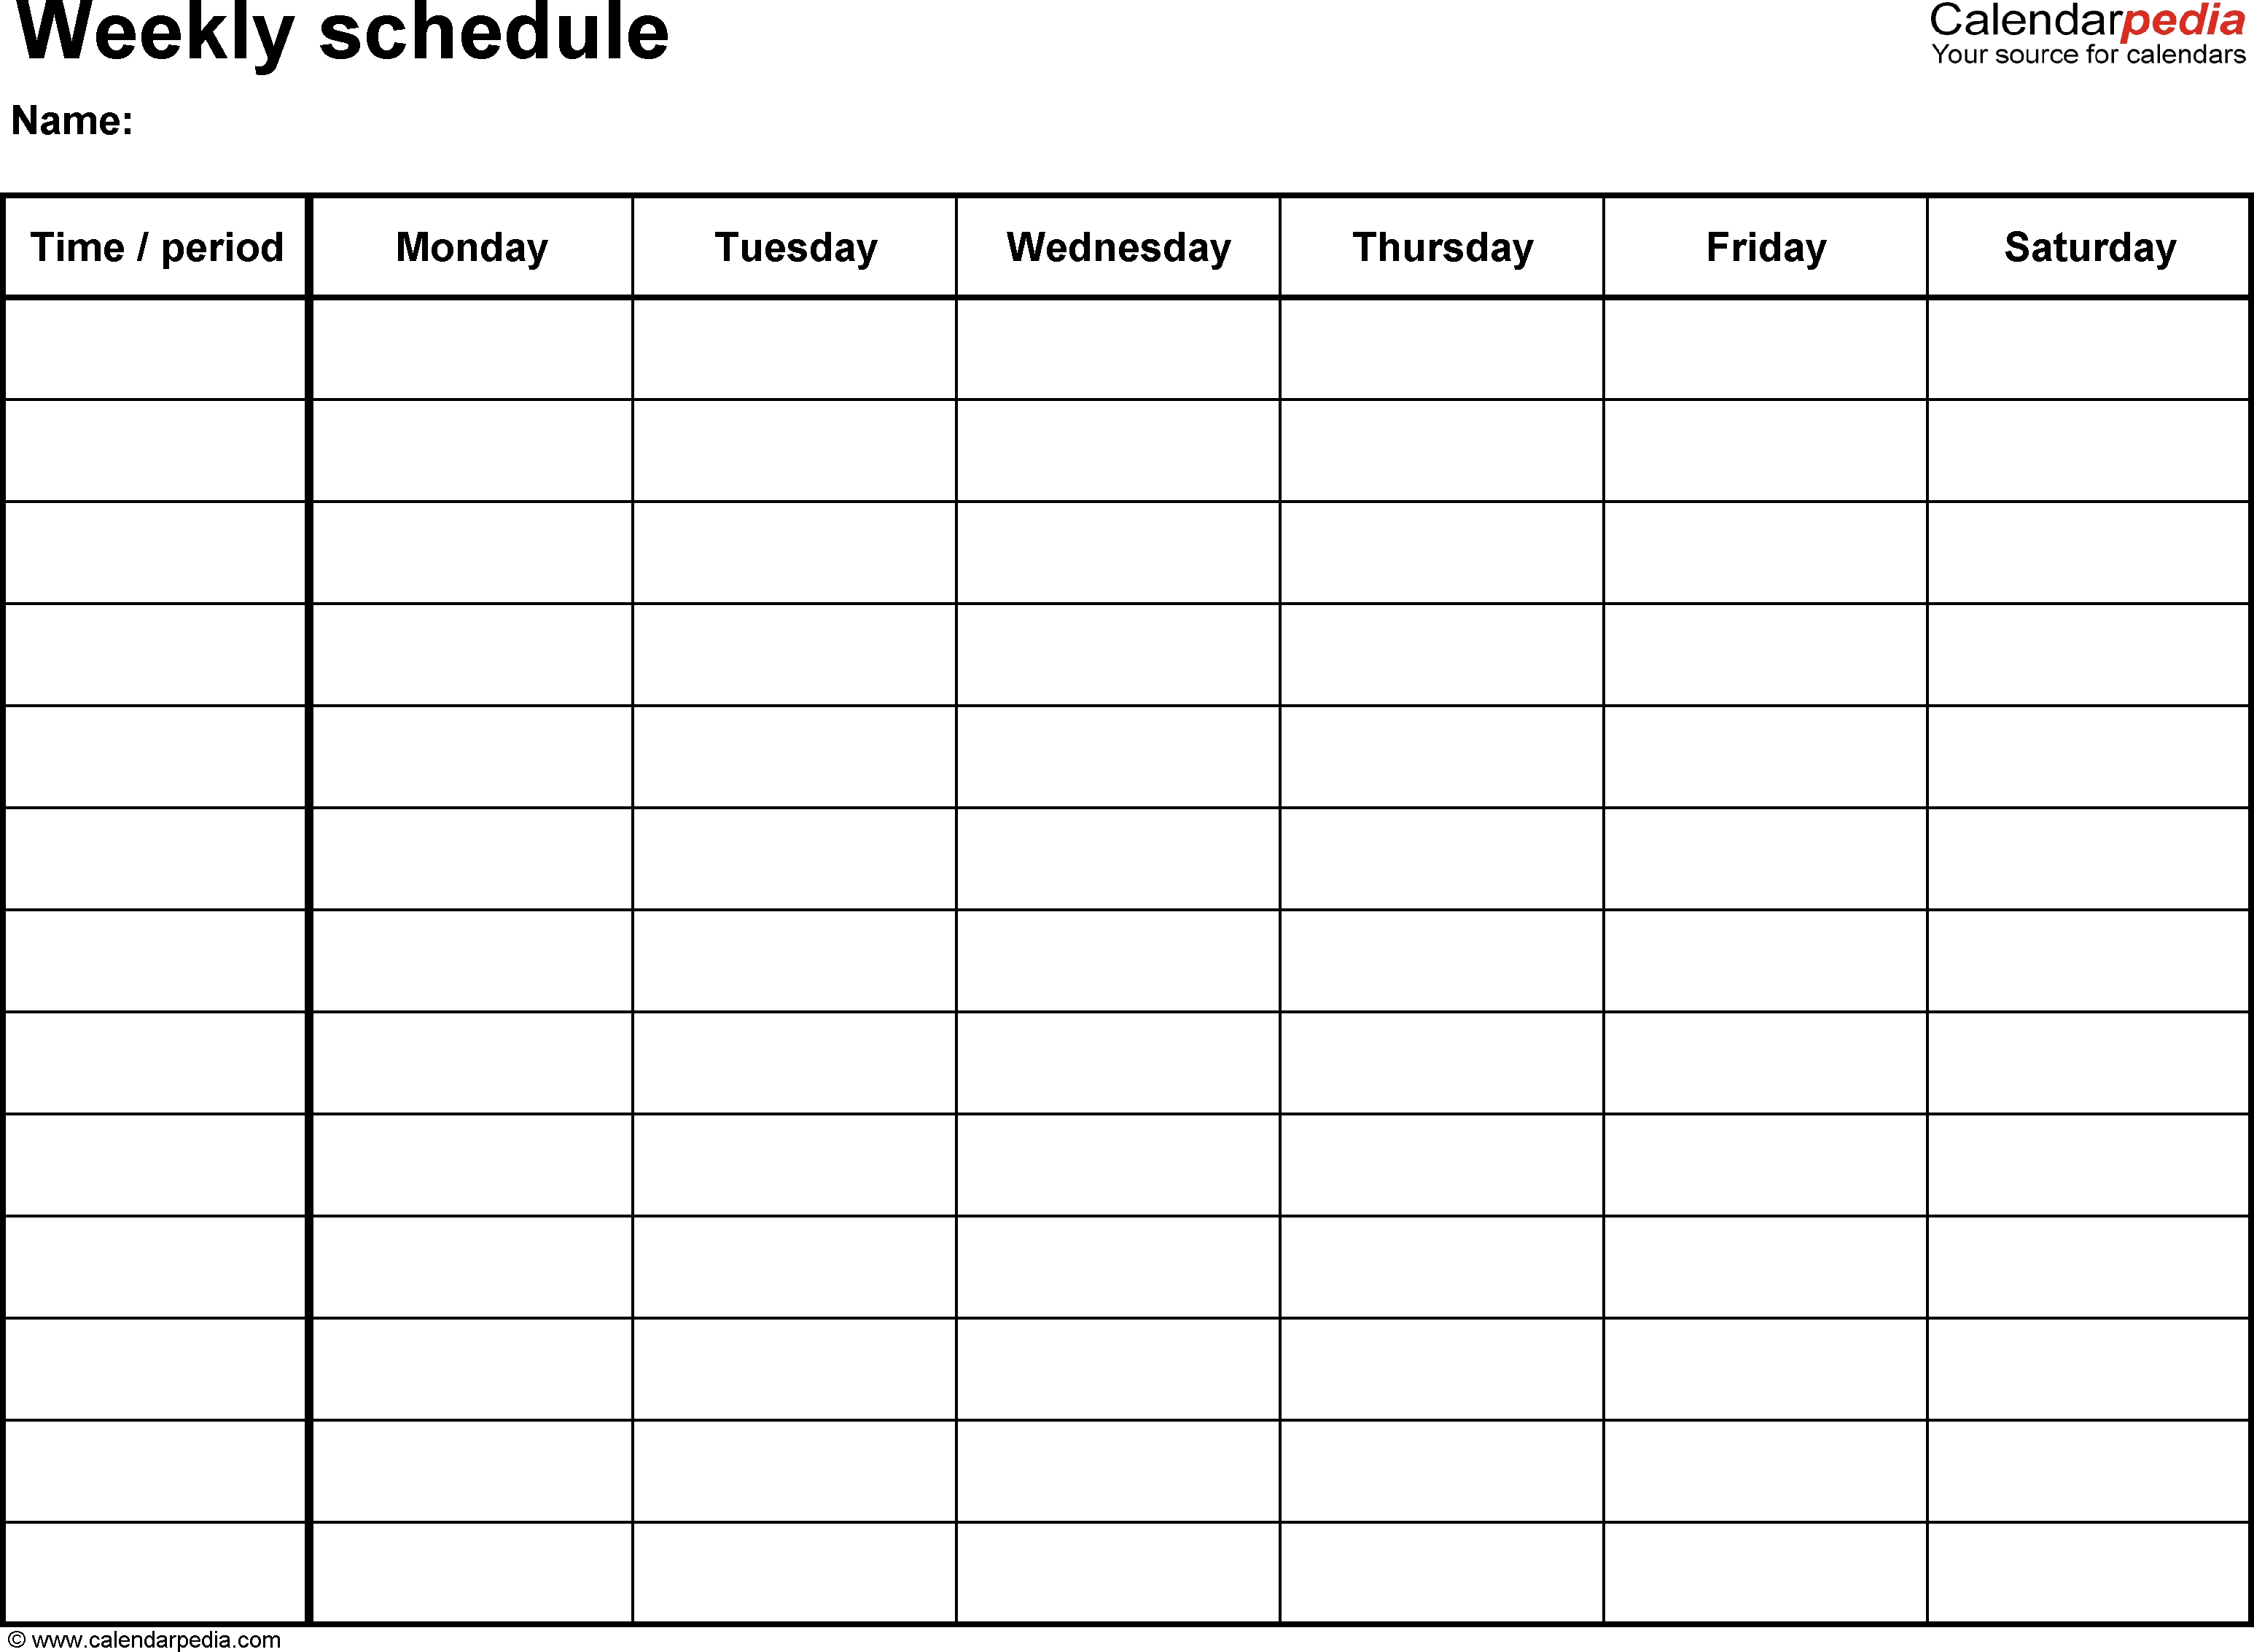 Free Weekly Schedule Templates For Word - 18 Templates-Monday - Friday Diary Template